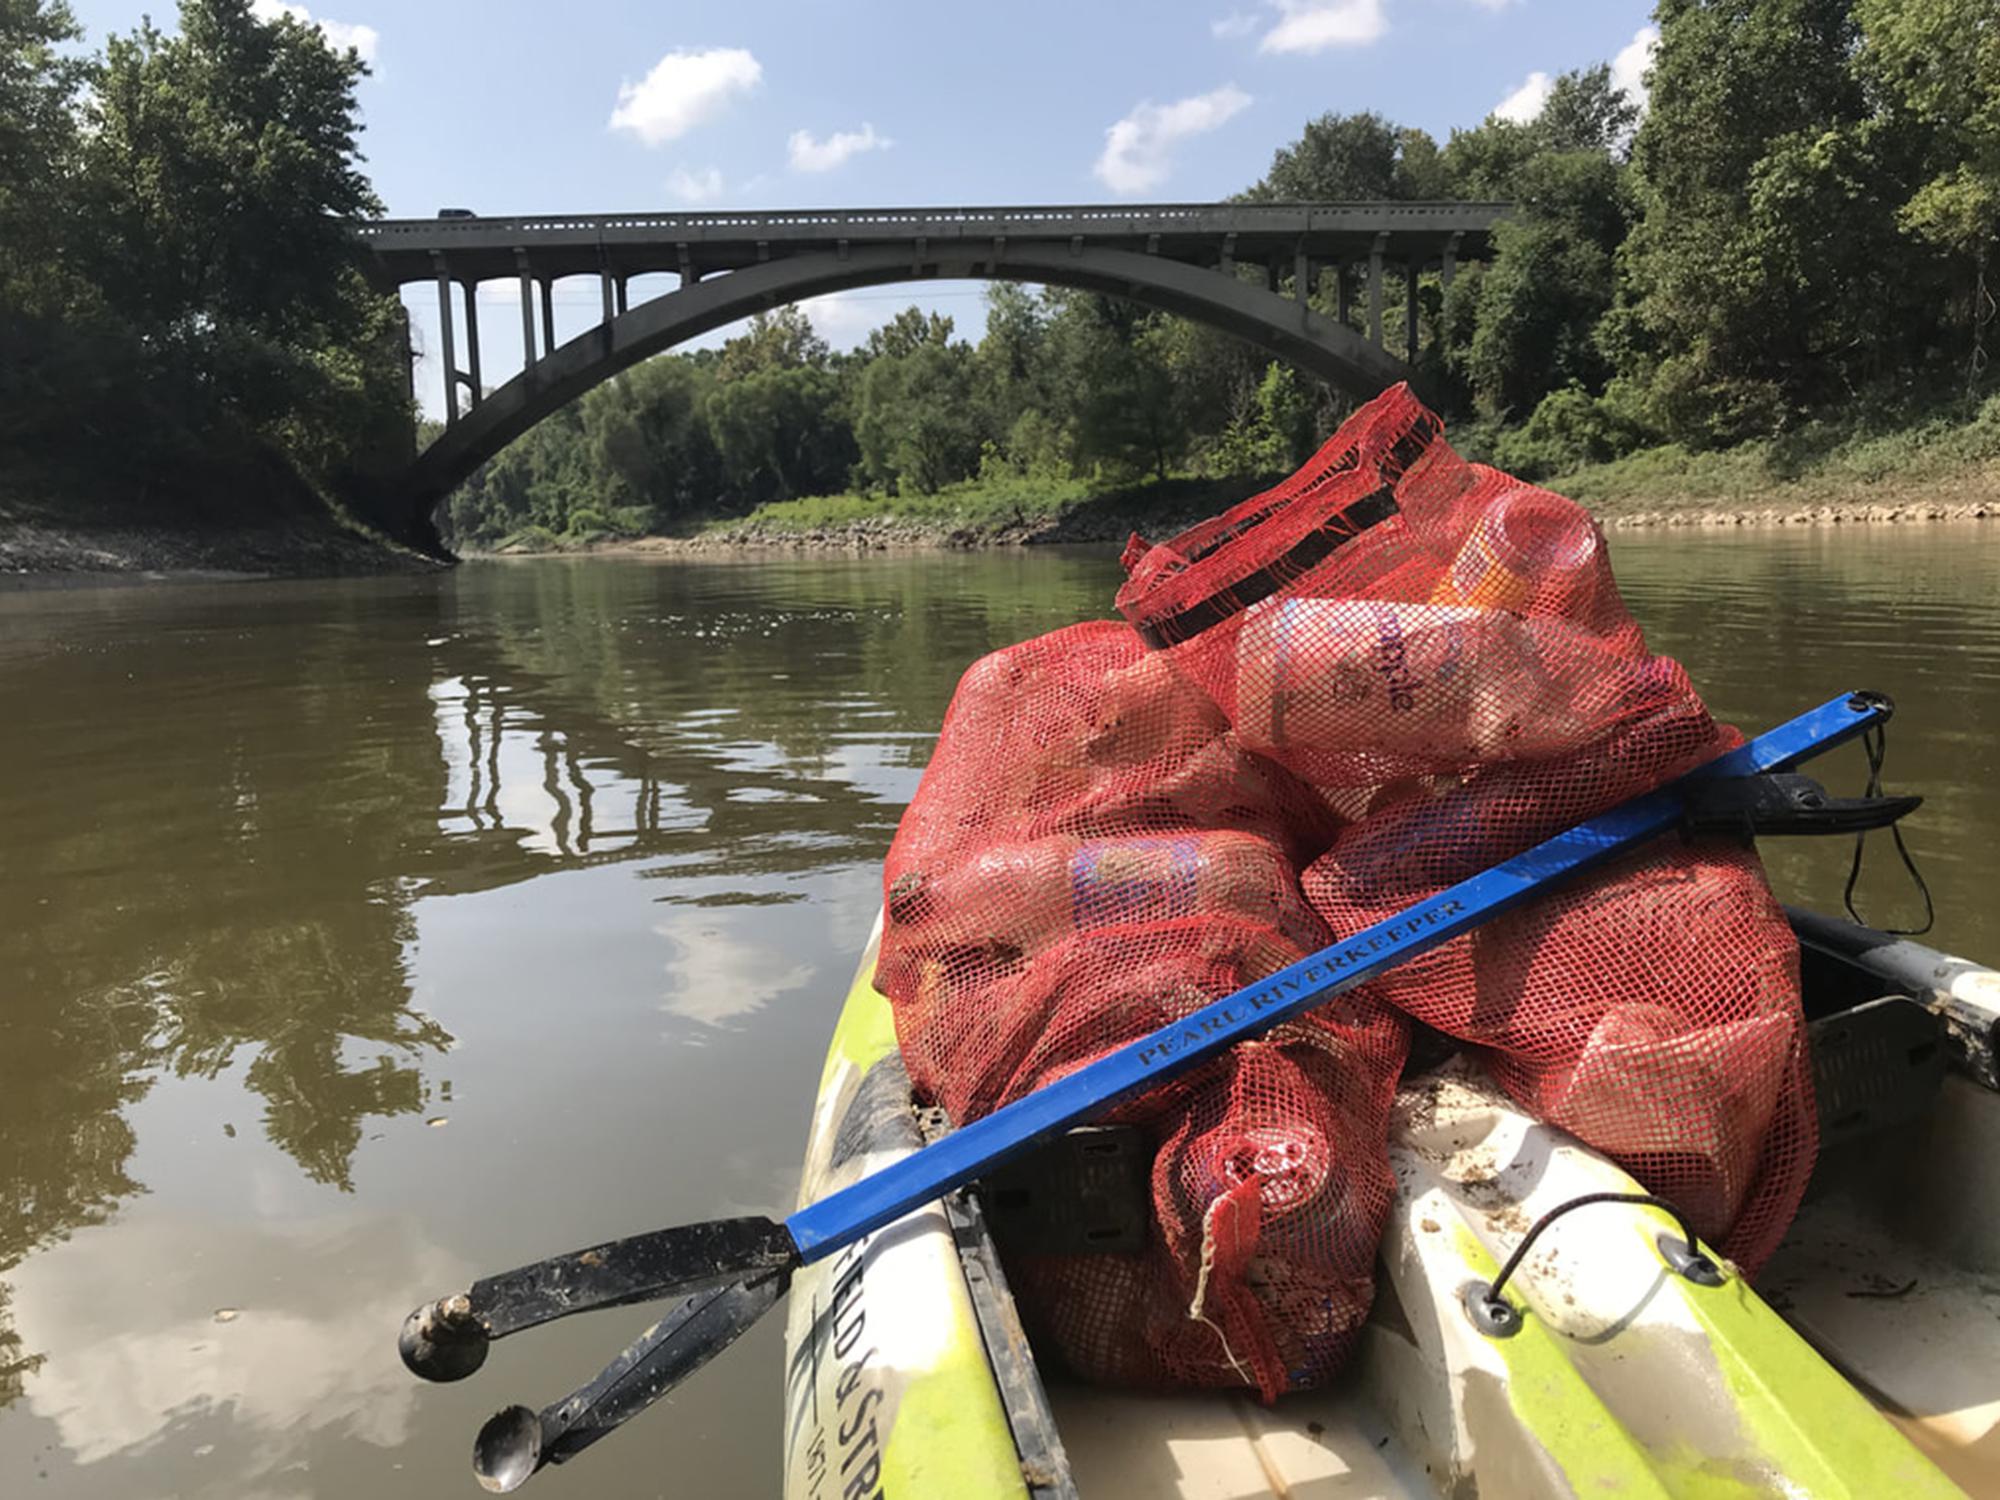 The front of a kayak has two red meshed bags containing litter and a blue trash-grabbing tool with the words “Pearl Riverkeeper” printed on it. The boat is on a small river and approaching a highway bridge.